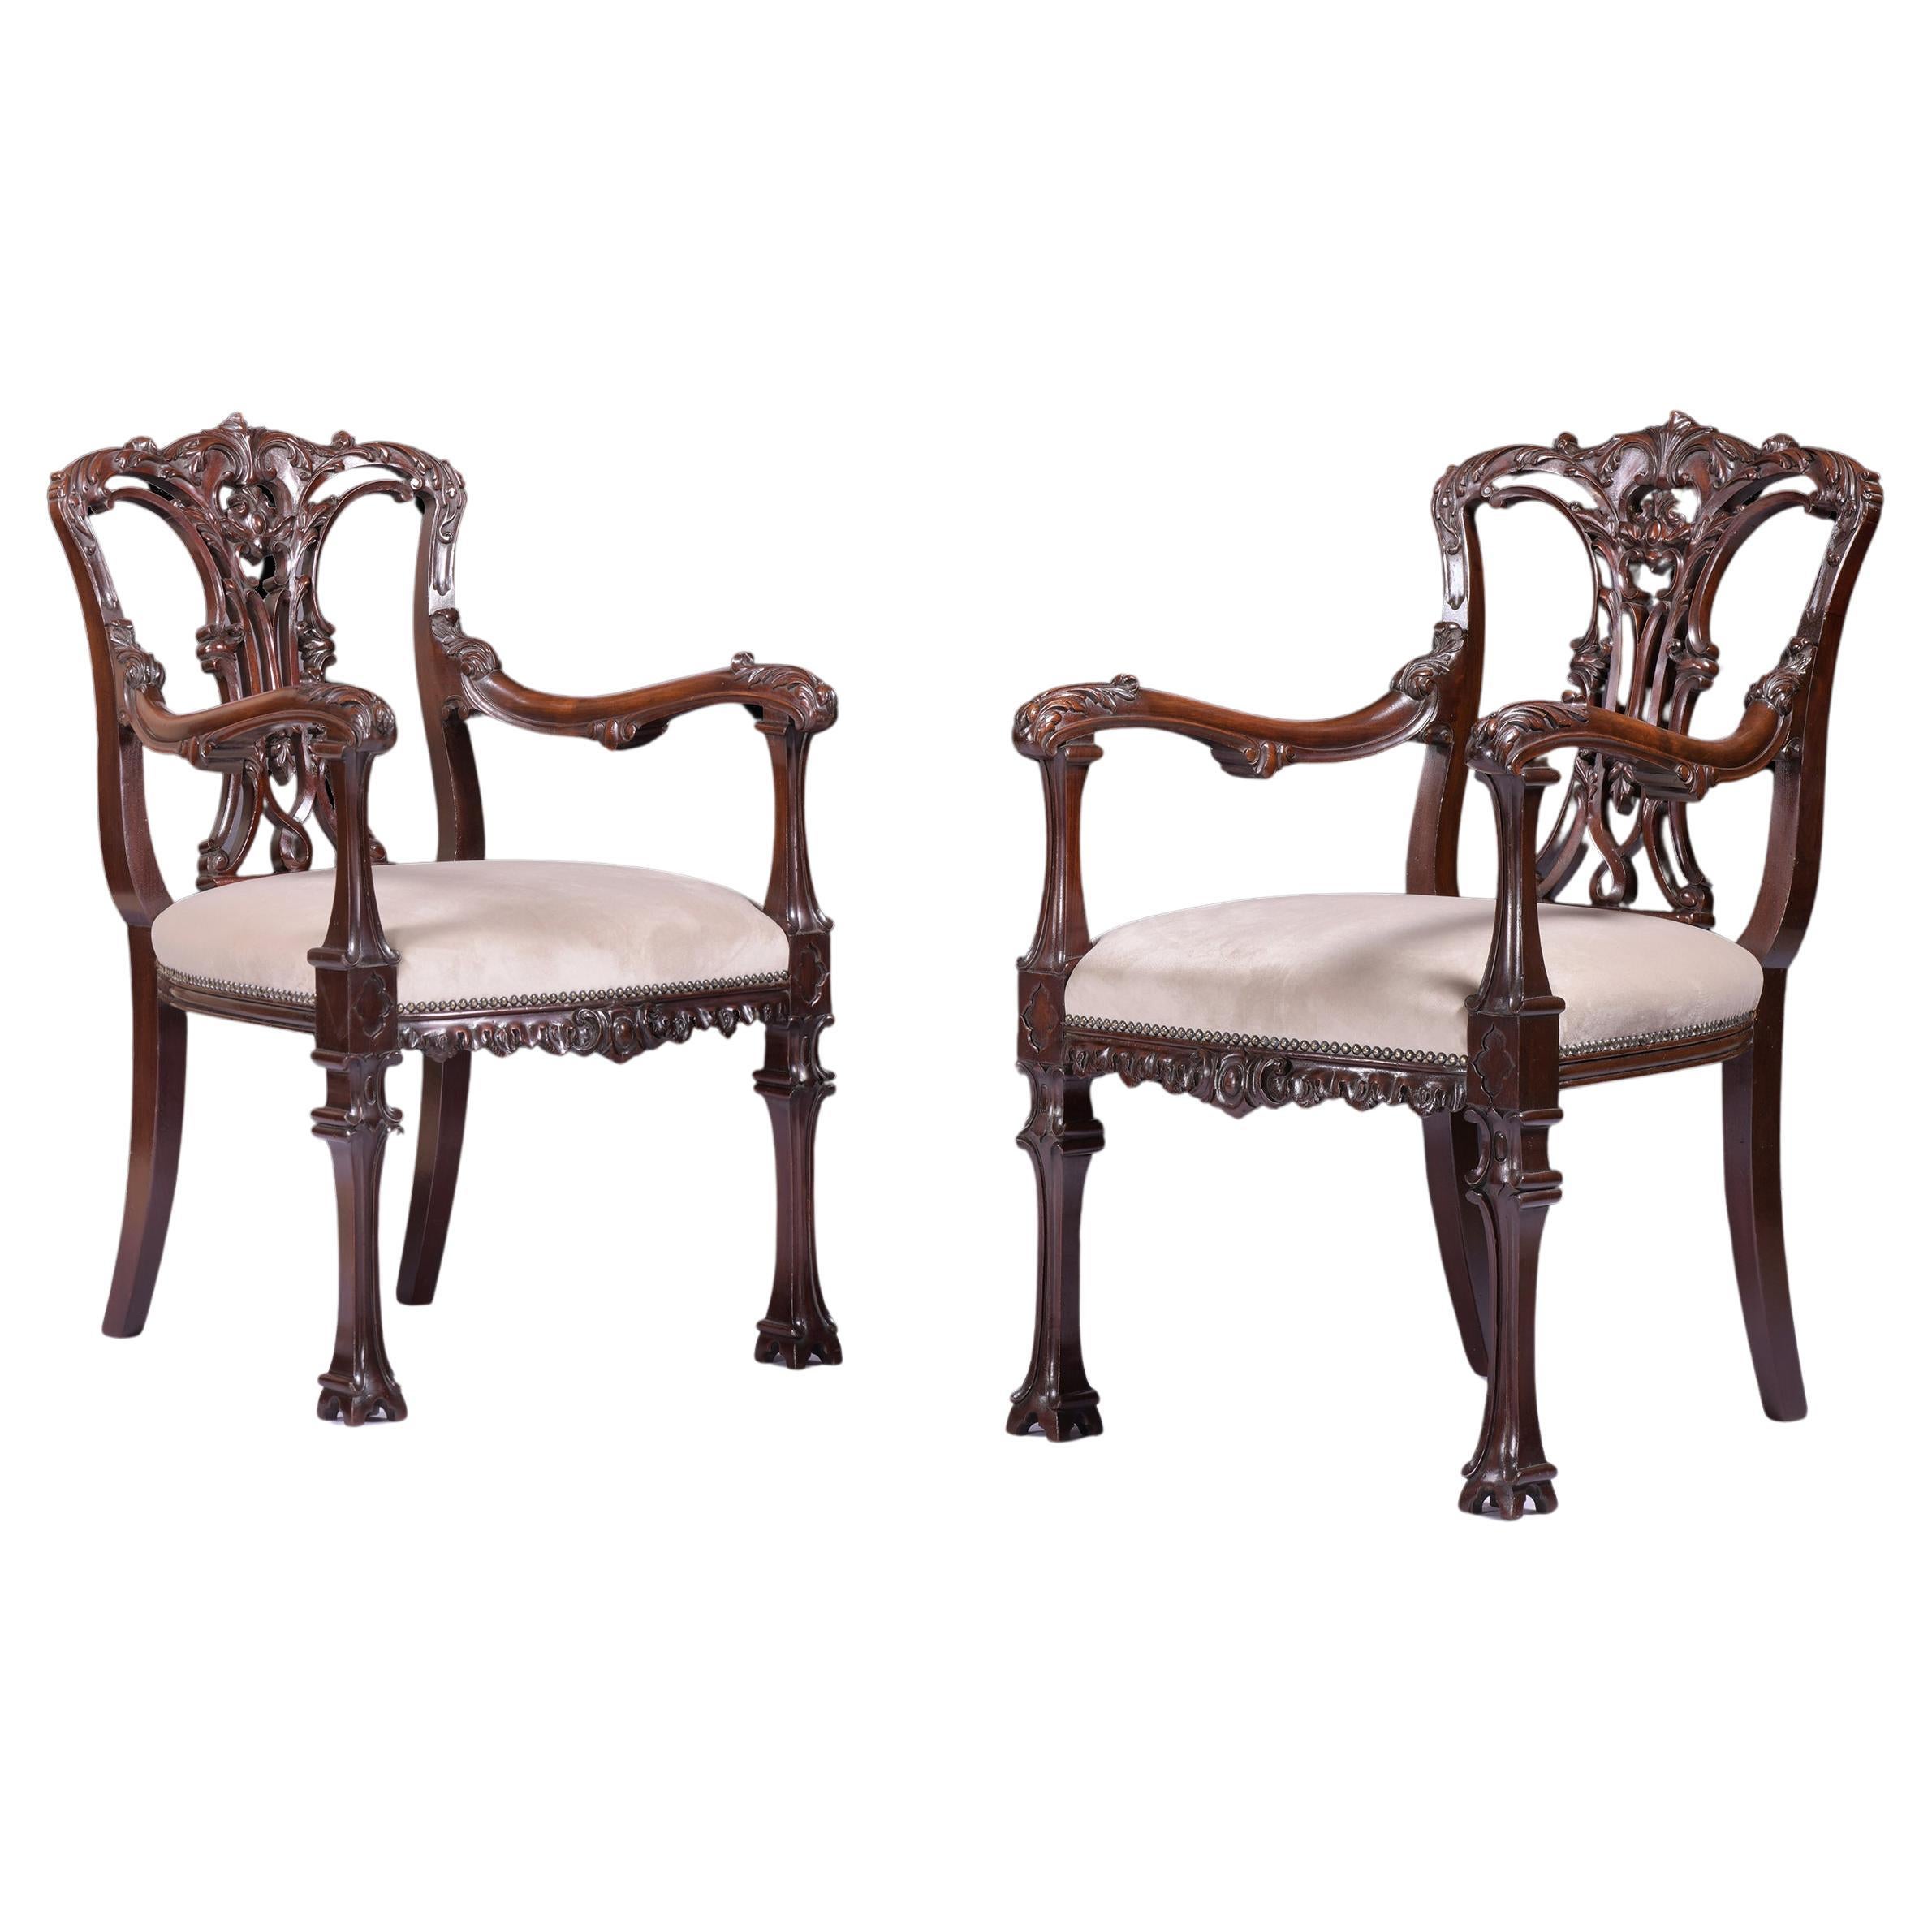 Pair Of 19th Century English Armchairs In The Chinese Chippendale Style For Sale